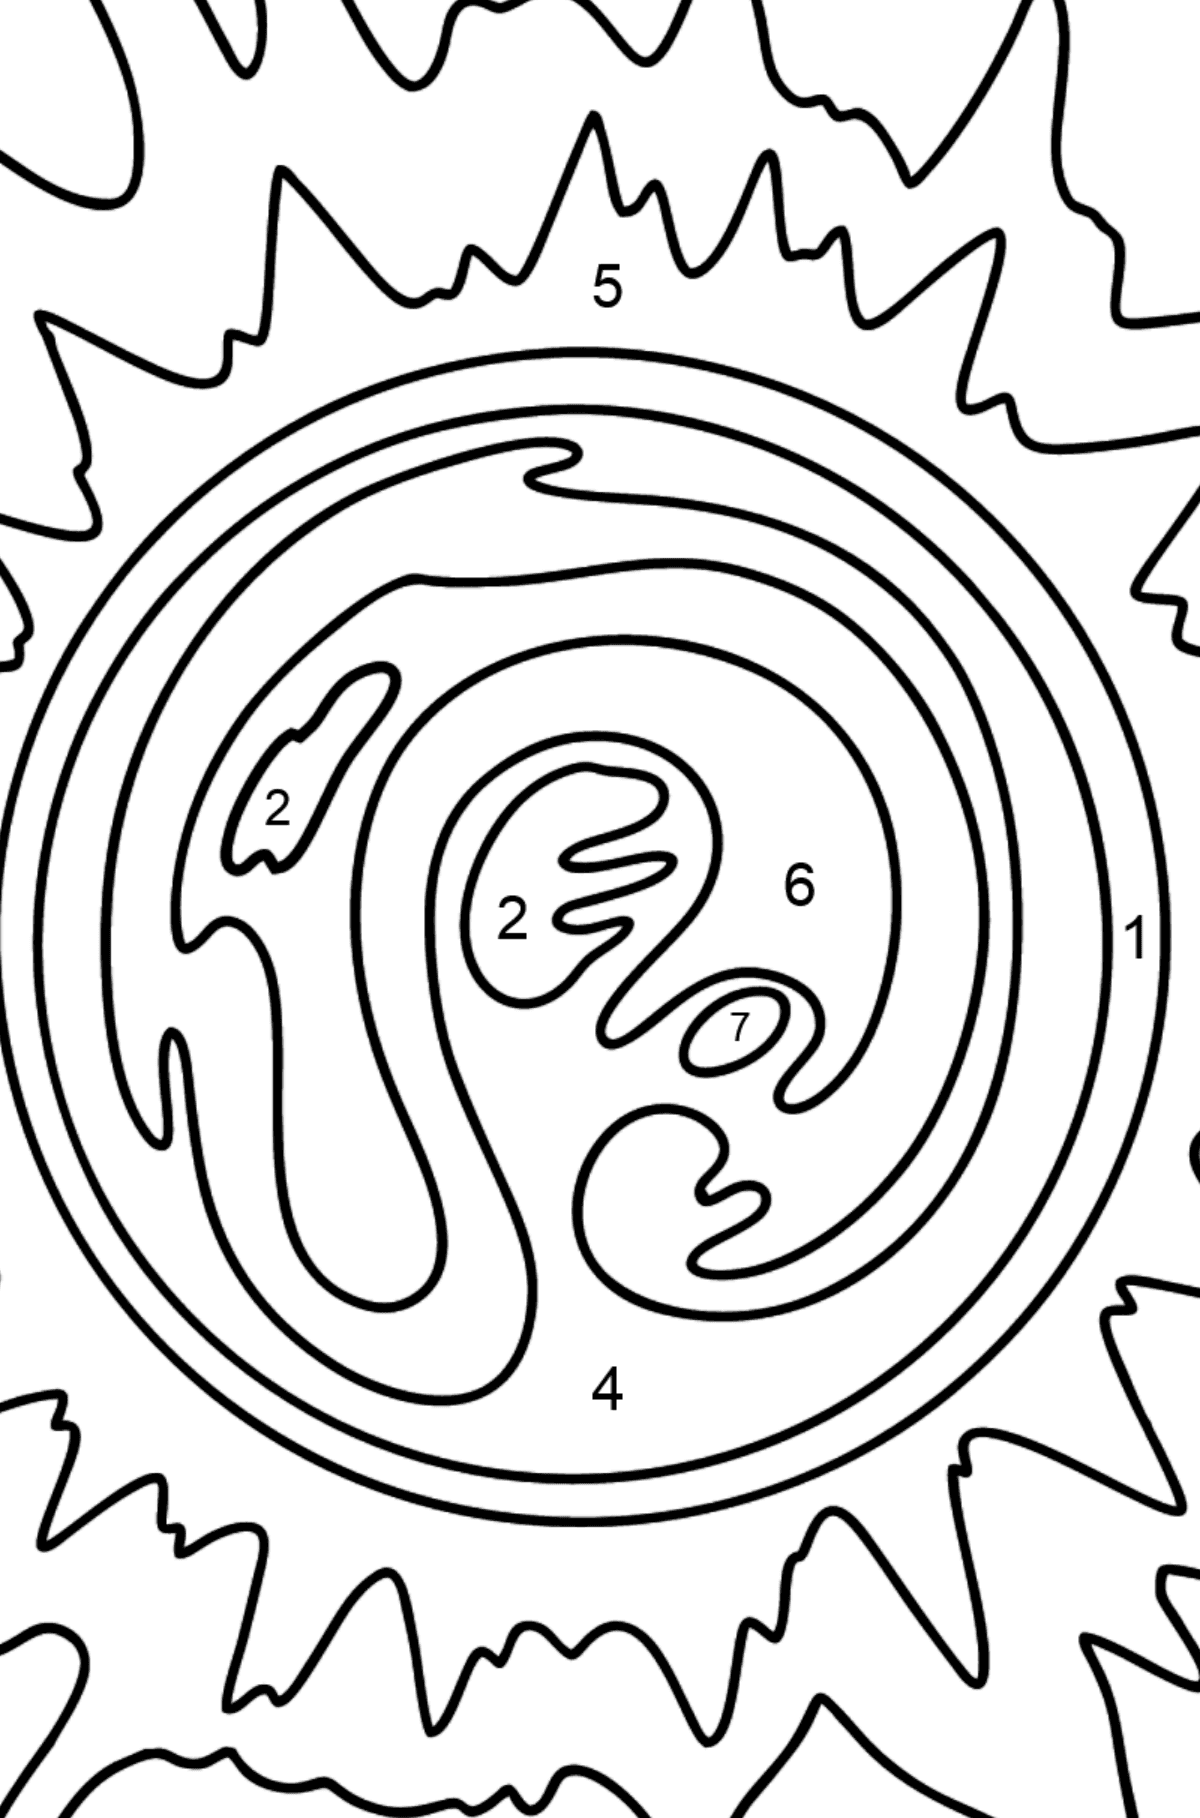 Sun coloring page - Coloring by Numbers for Kids